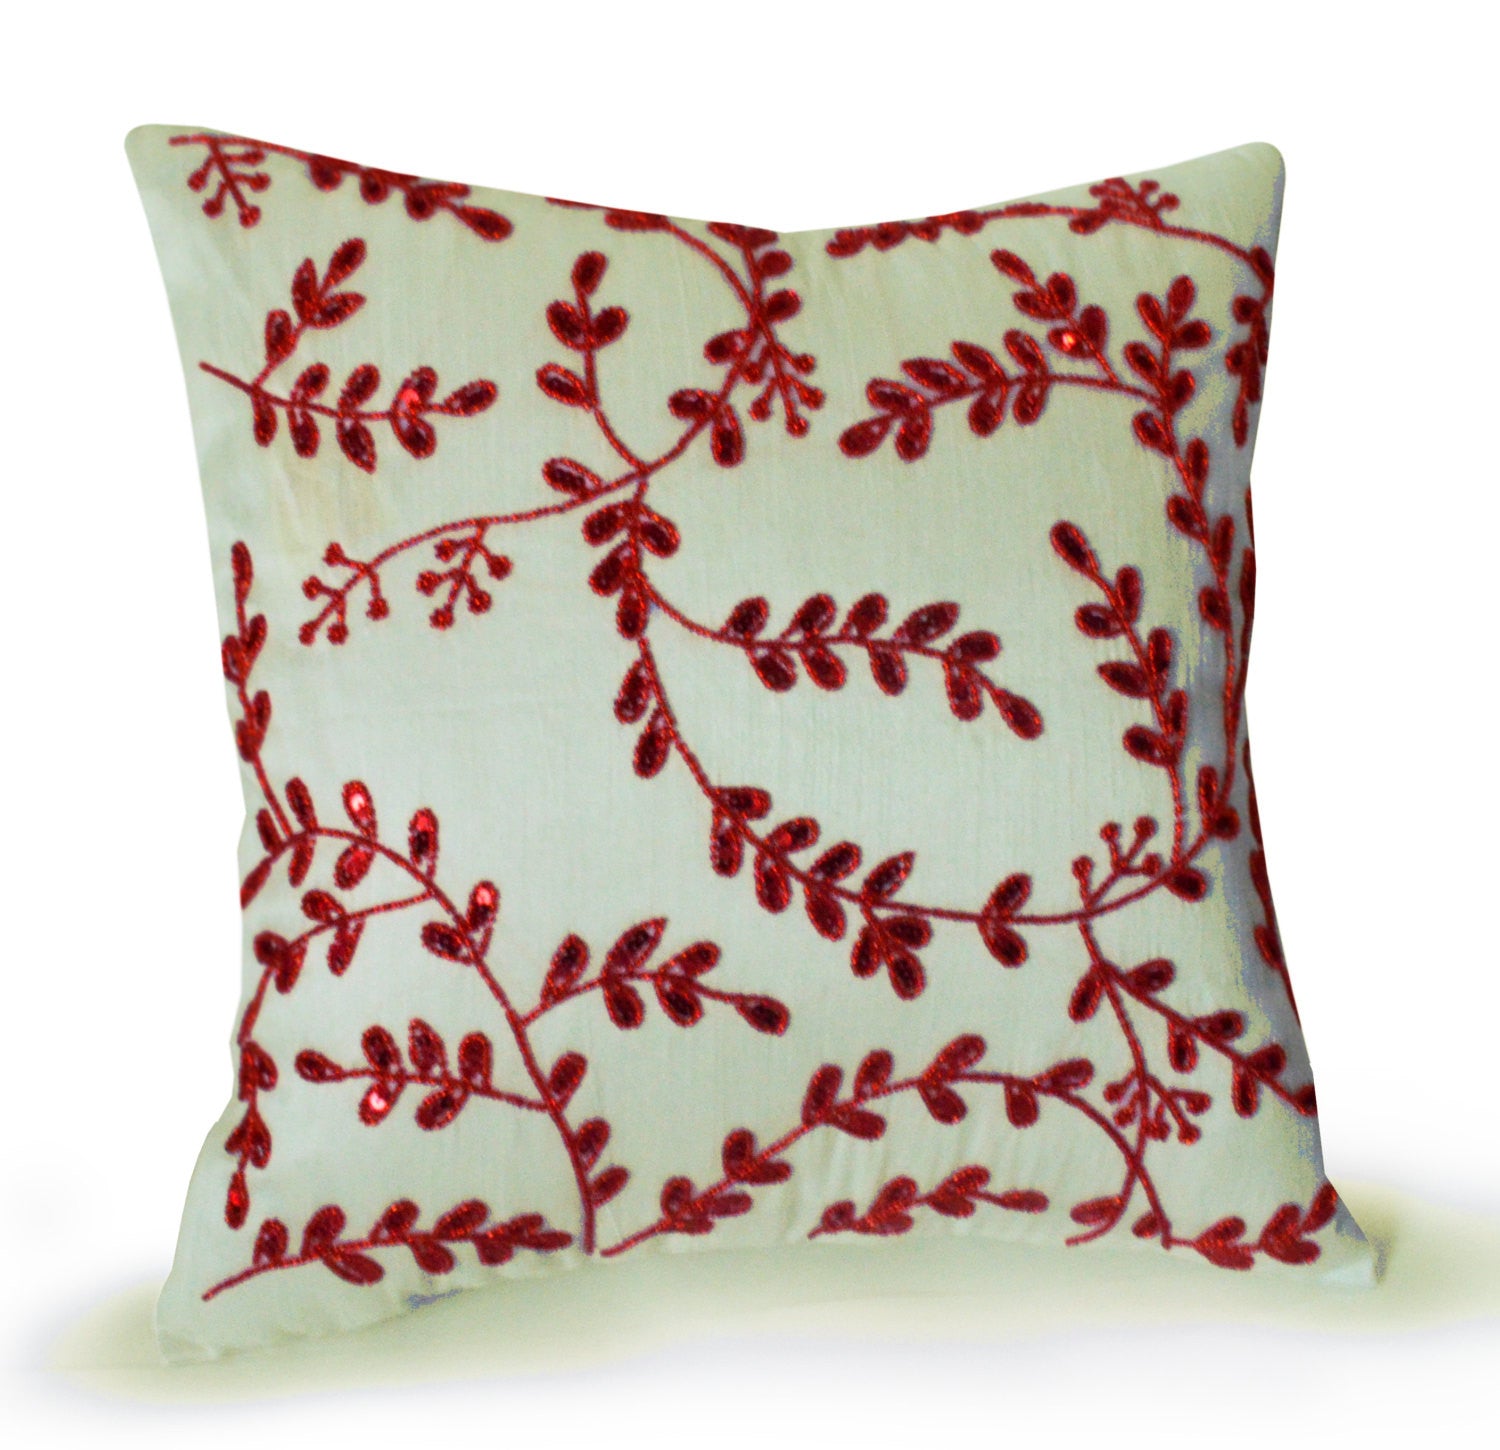 Ivory silk throw pillow with red sequins beads floral design